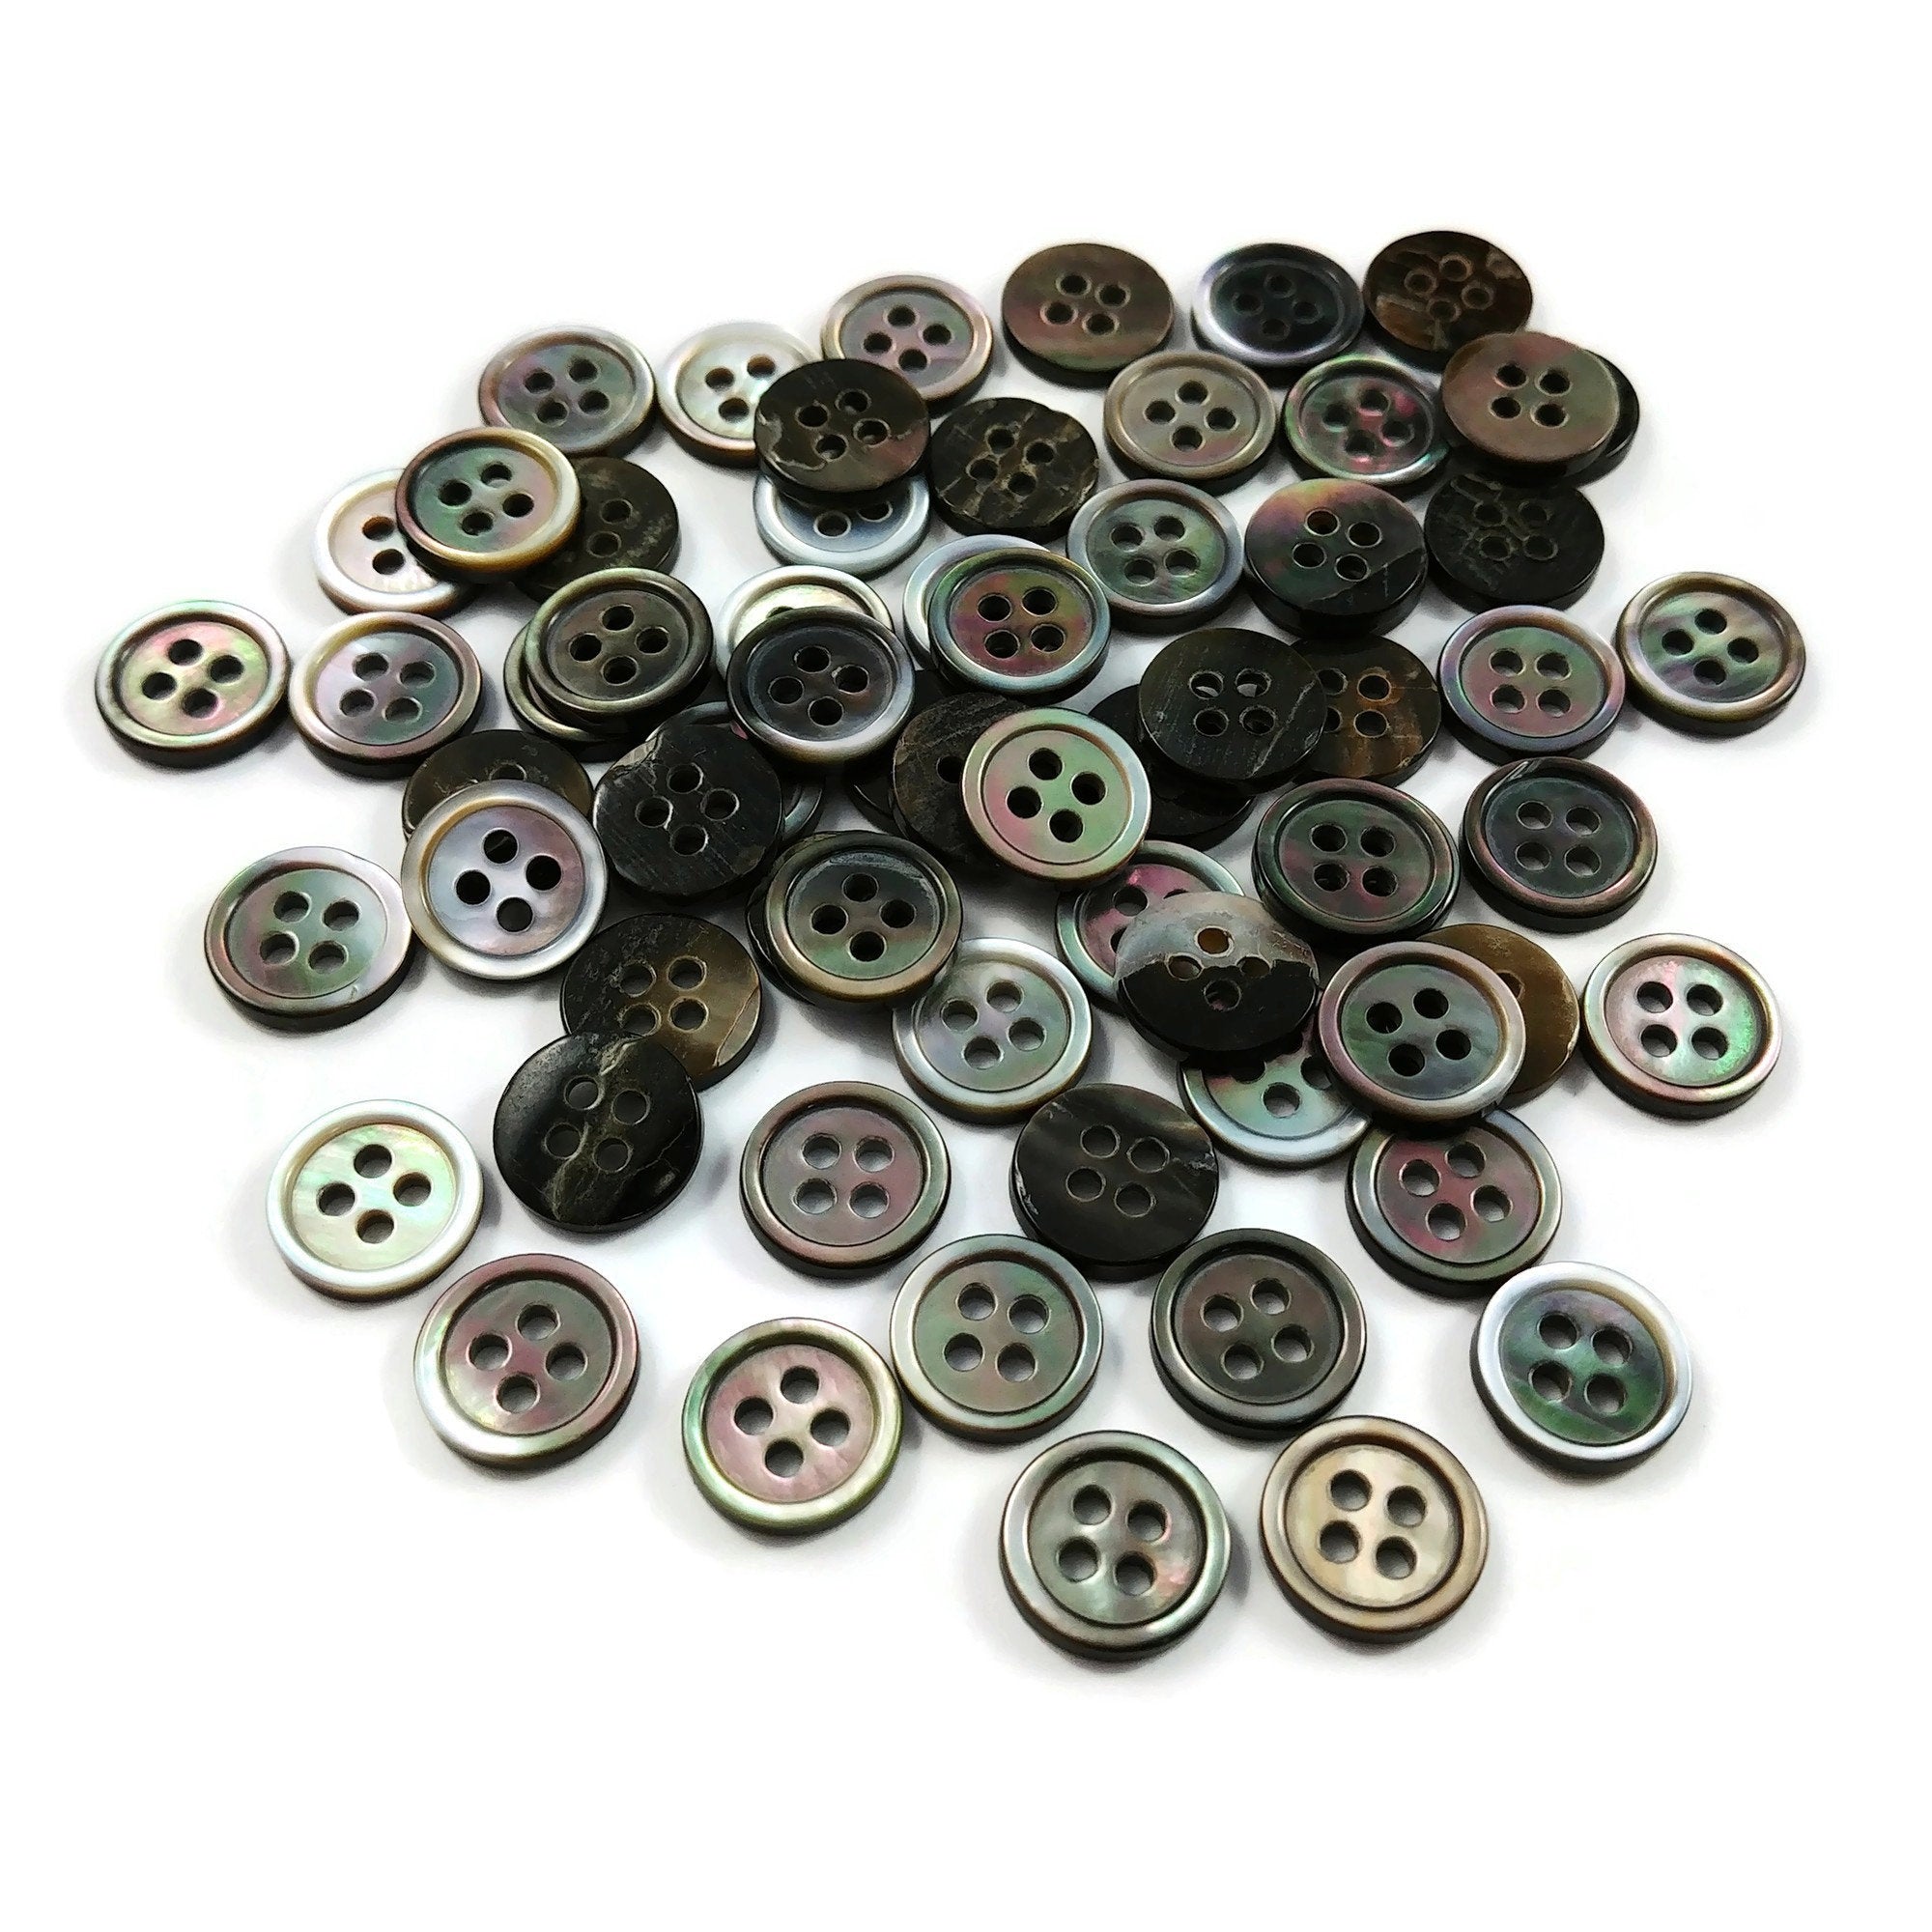 Grey mother of pearl buttons, Natural black lip shell sewing buttons, 4 sizes available